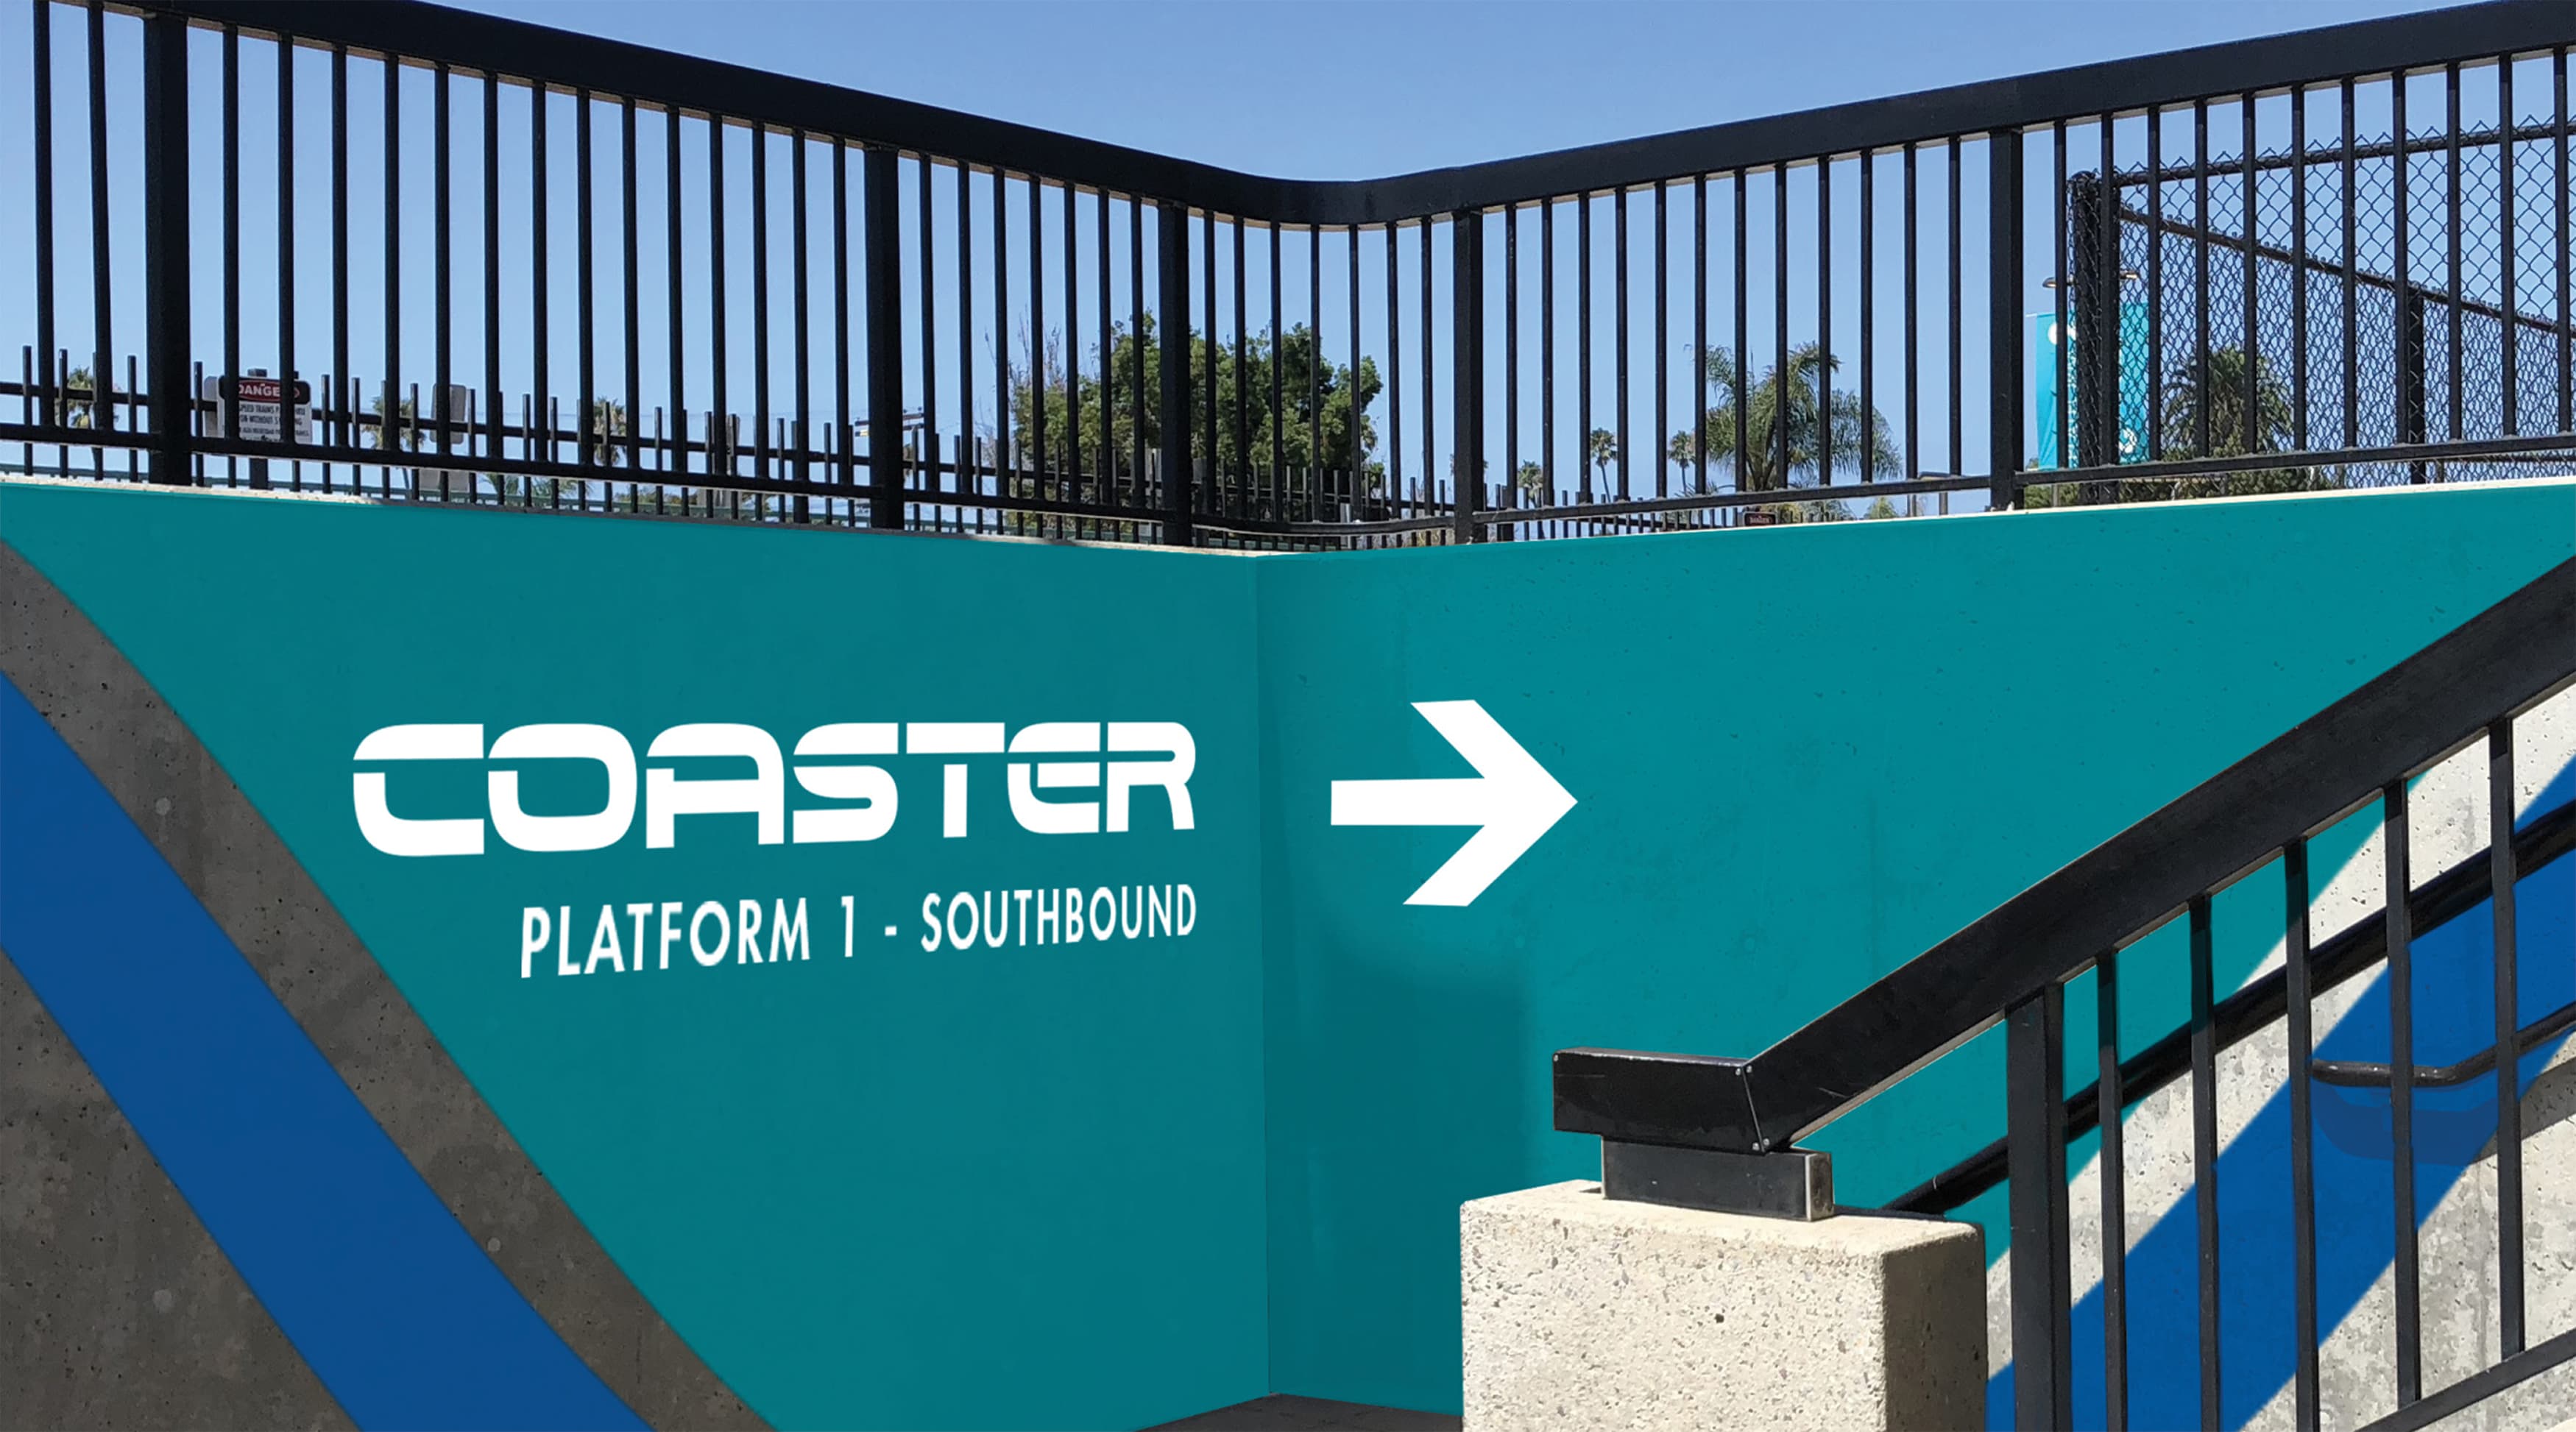 North County Transit District, the transit system in northern San Diego, California, worked with RSM Design to re-think what their transit system looks like. Graphic wayfinding design.